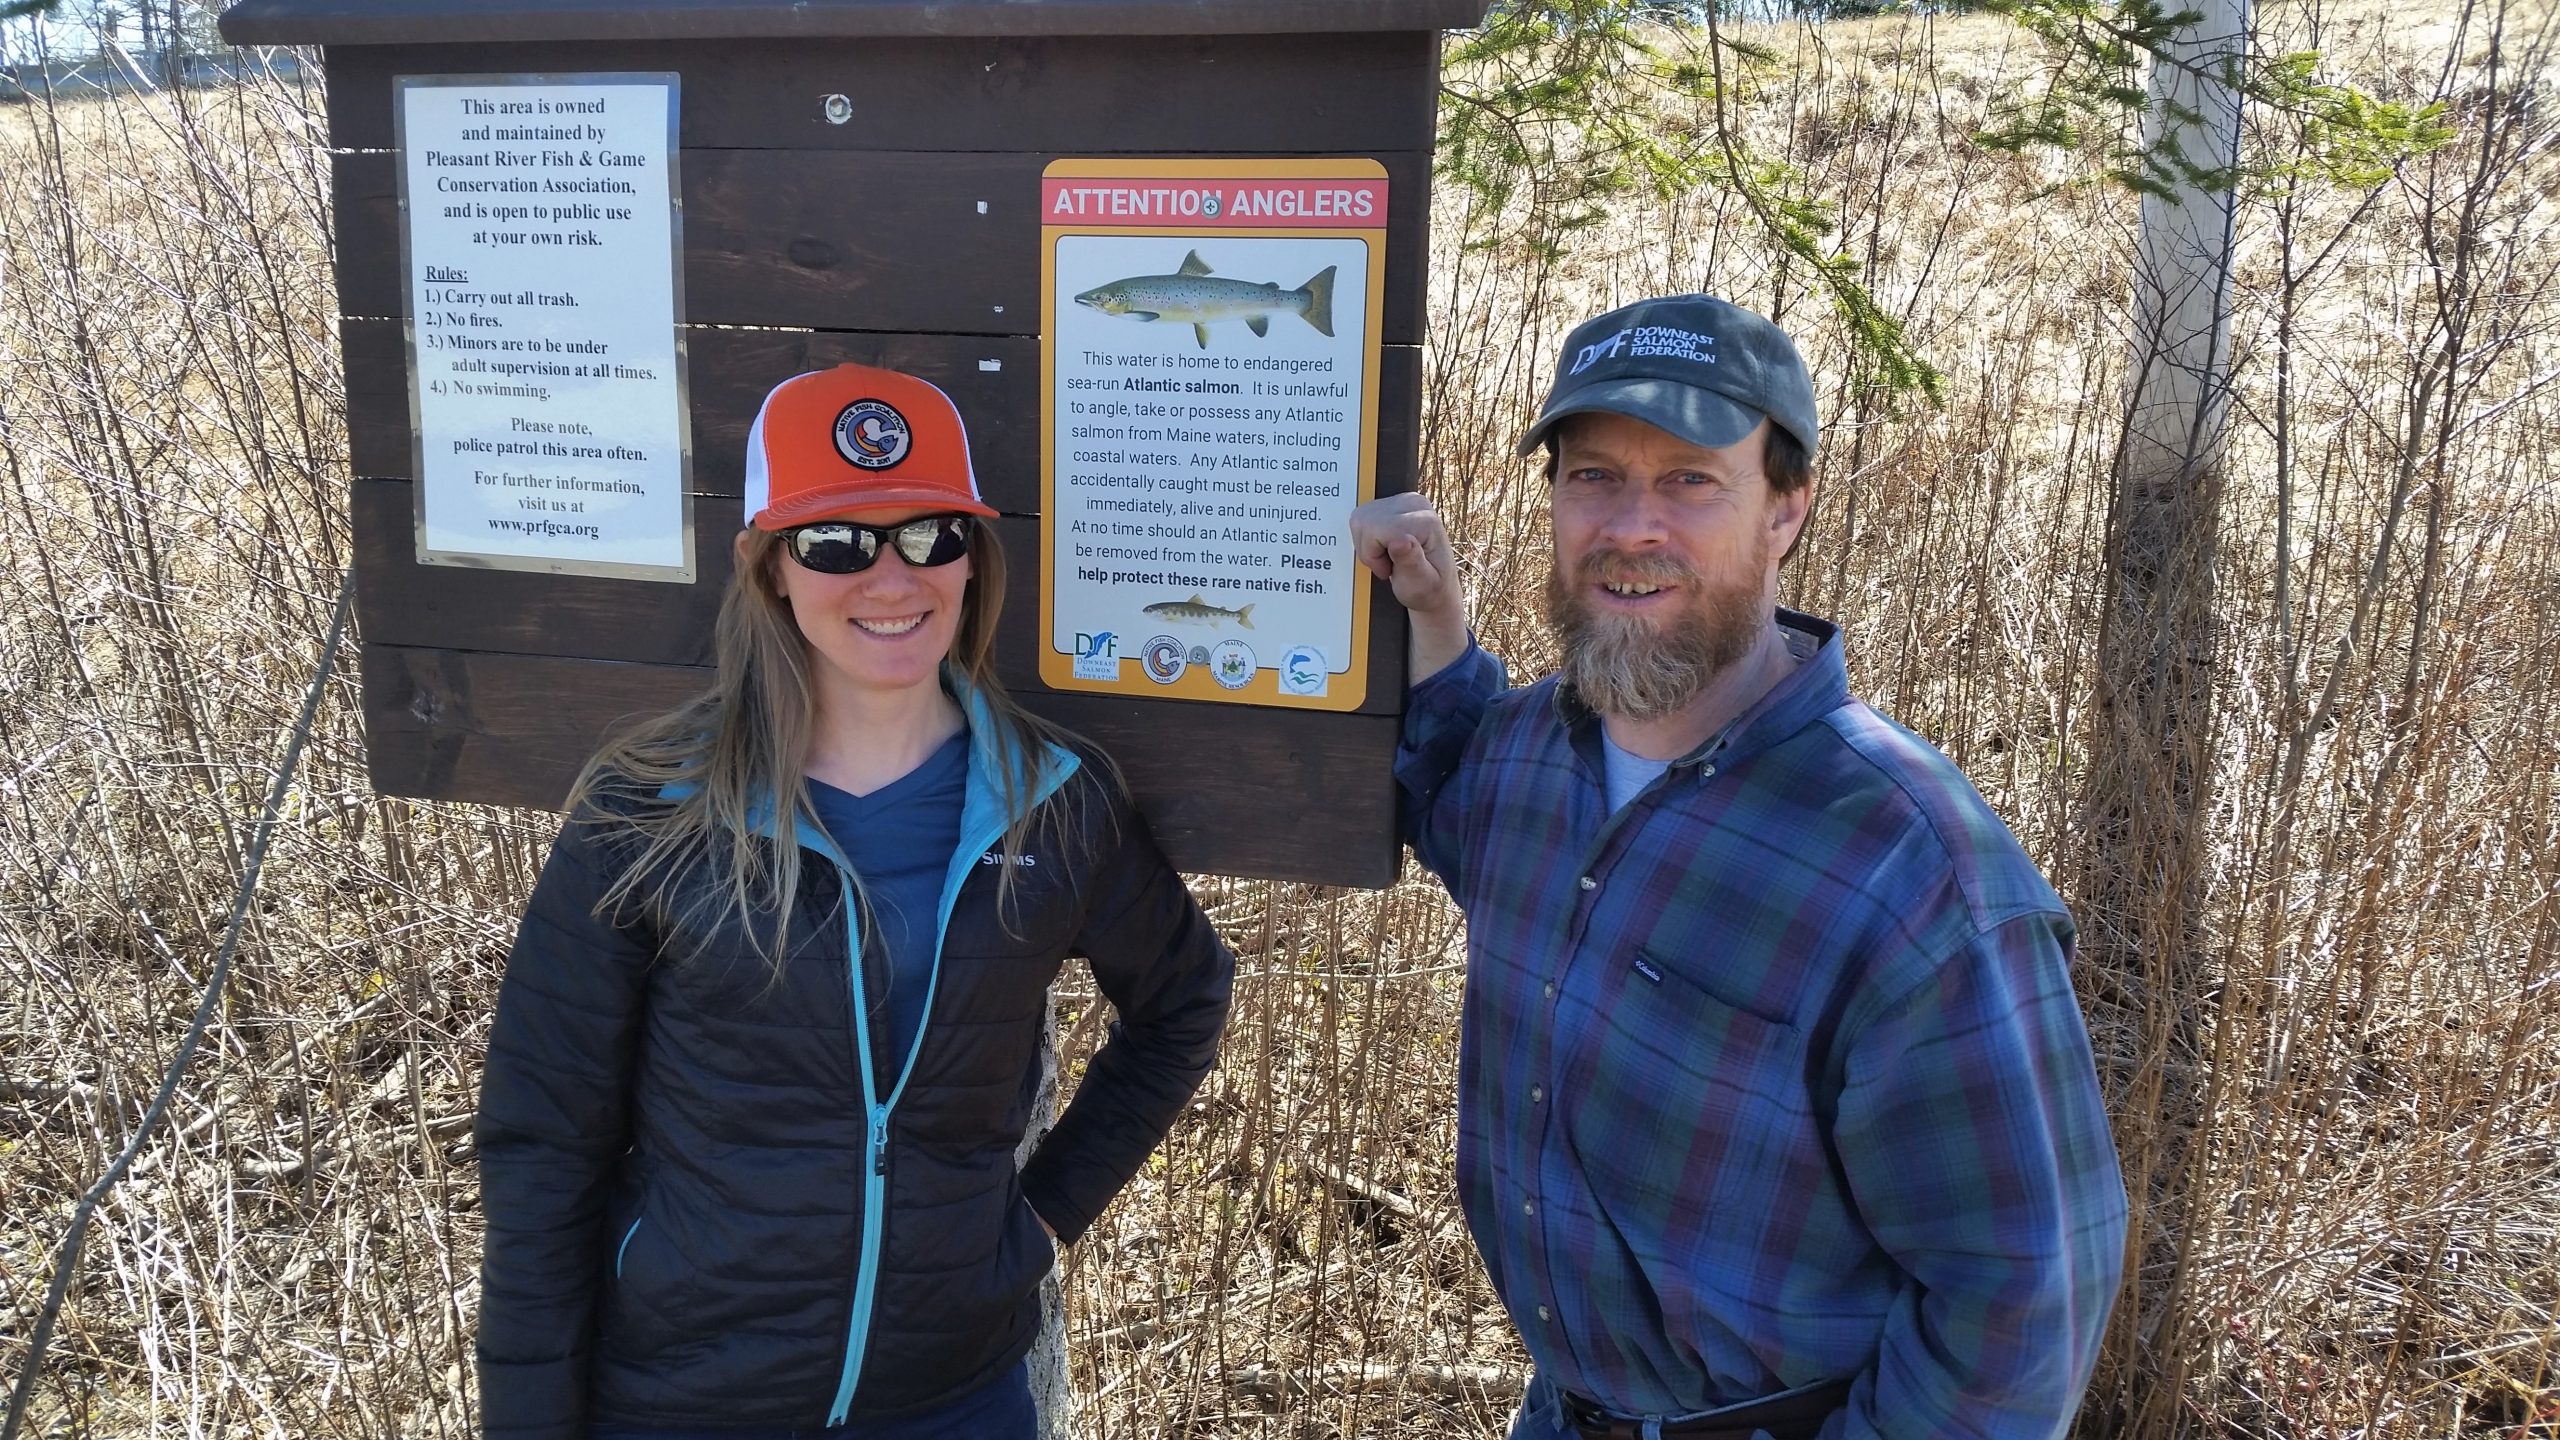 Emily Bastian, National Chair for Native Fish Coalition, and Dwayne Shaw, Executive Director for Downeast Salmon Federation posting an informational sign on the Pleasant River in Maine. (© Bob Mallard)